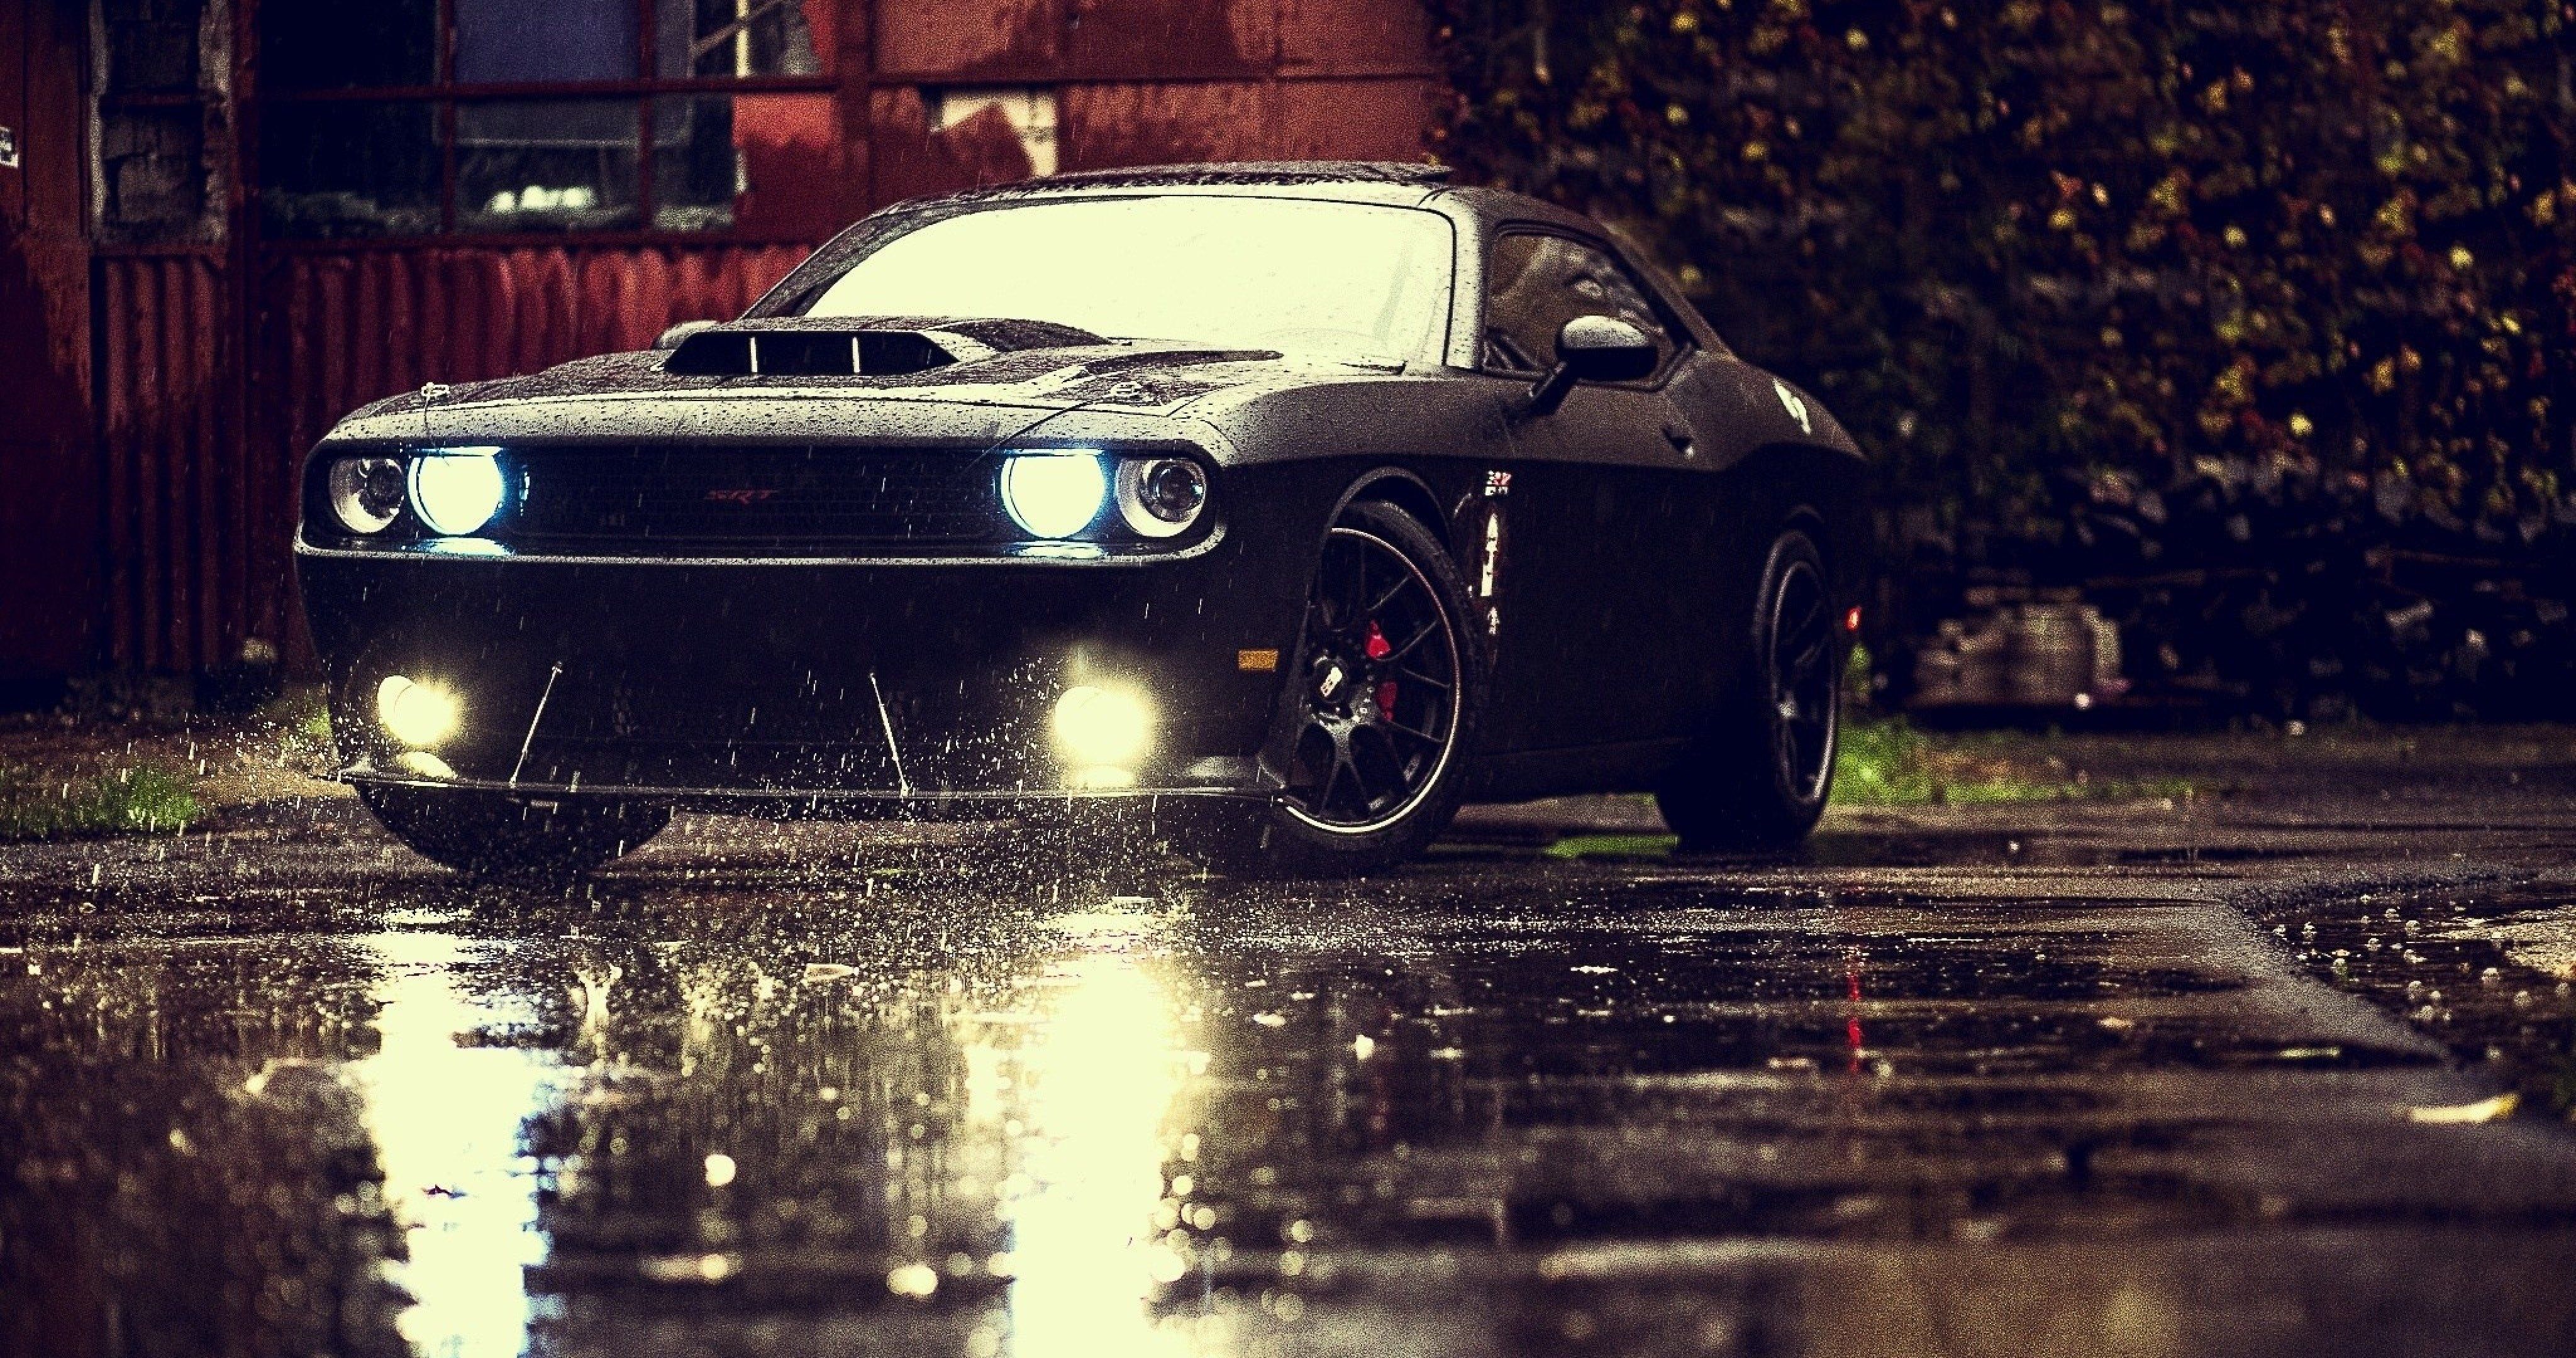 Muscle Cars 4k Computer Wallpapers - Wallpaper Cave Muscle Car Wallpaper 1920x1080